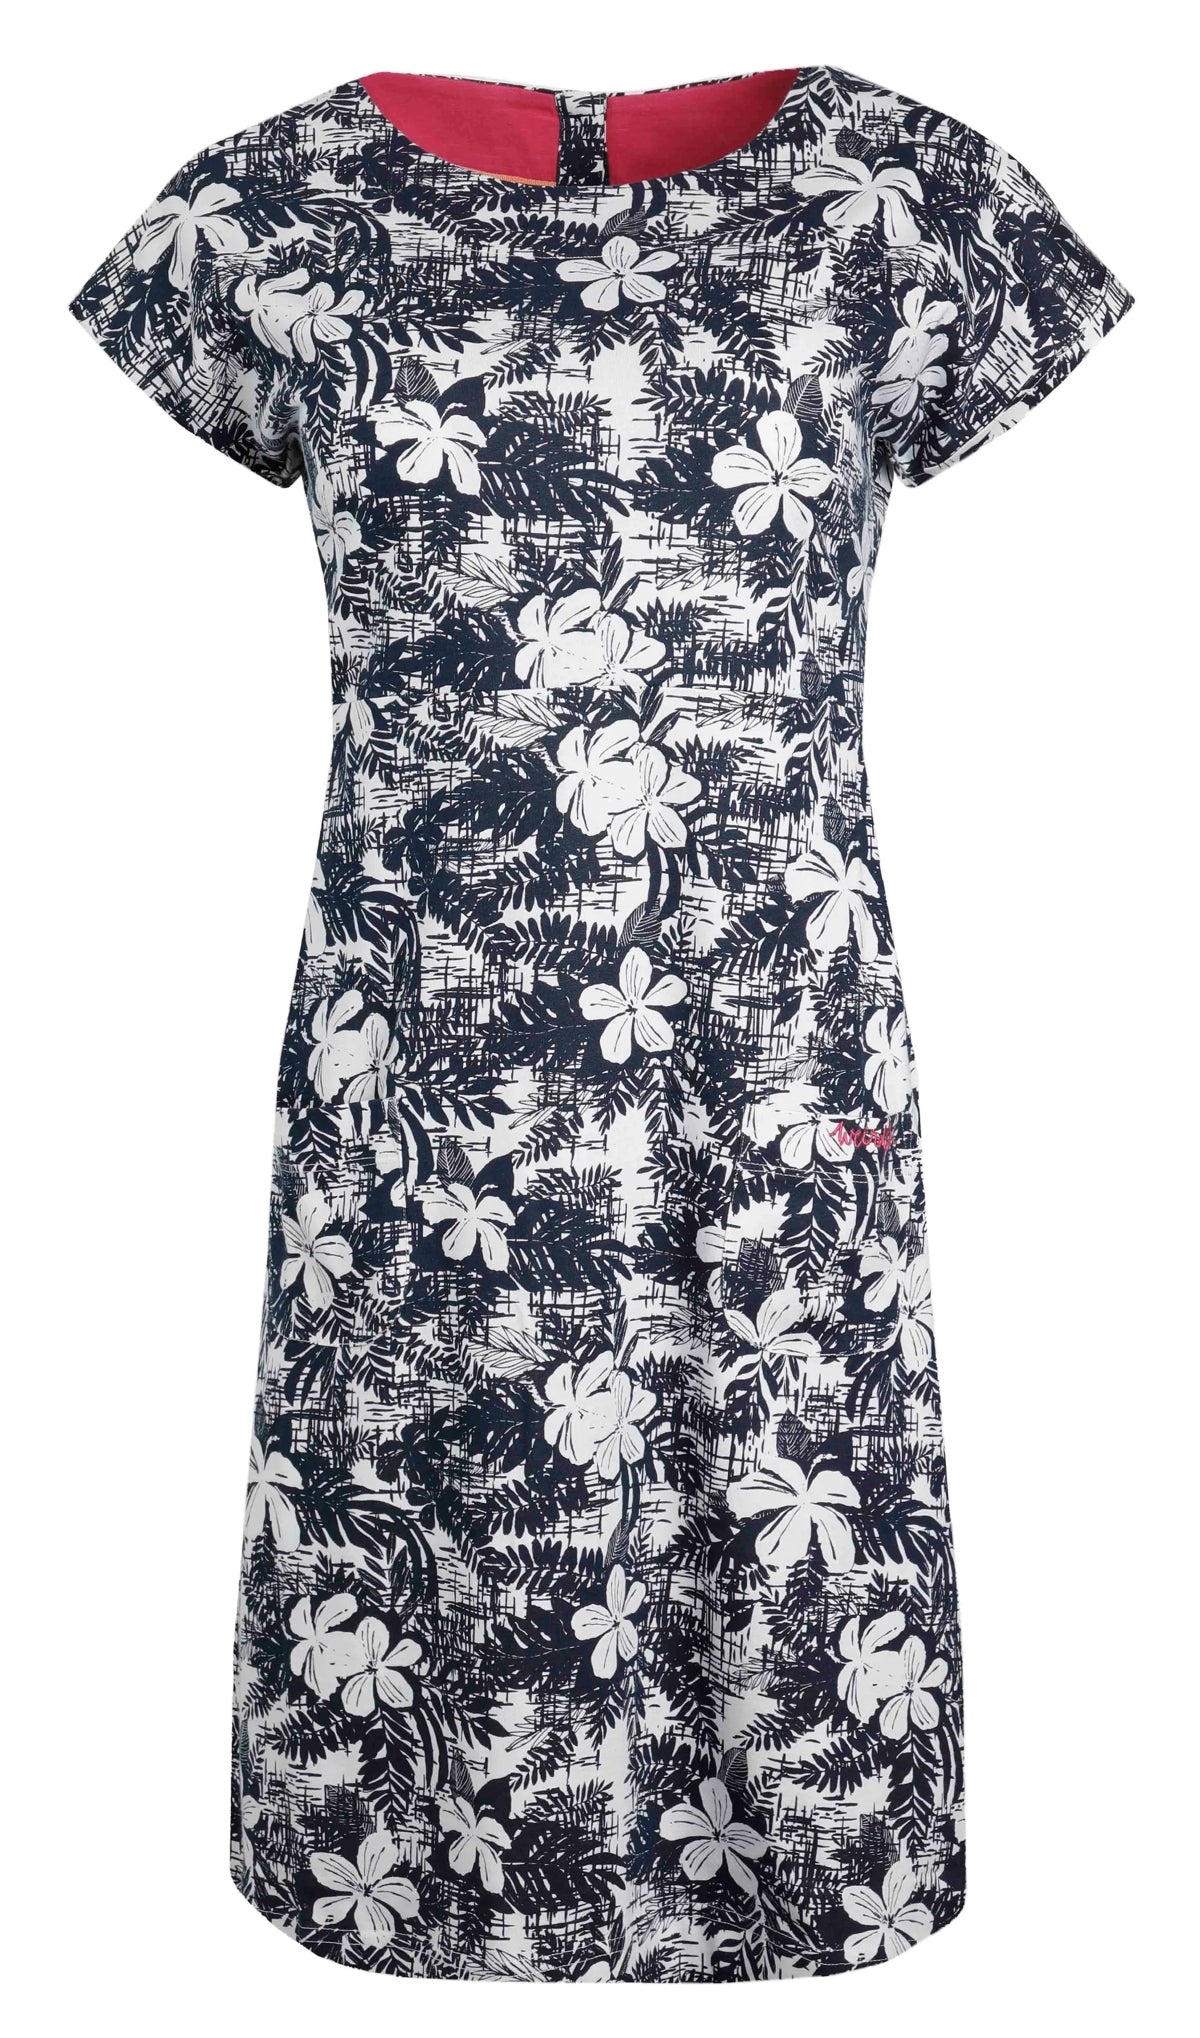 Short sleeve women's Tallahassee dress from Weird Fish in Dark Denim Blue with a White floral pattern.